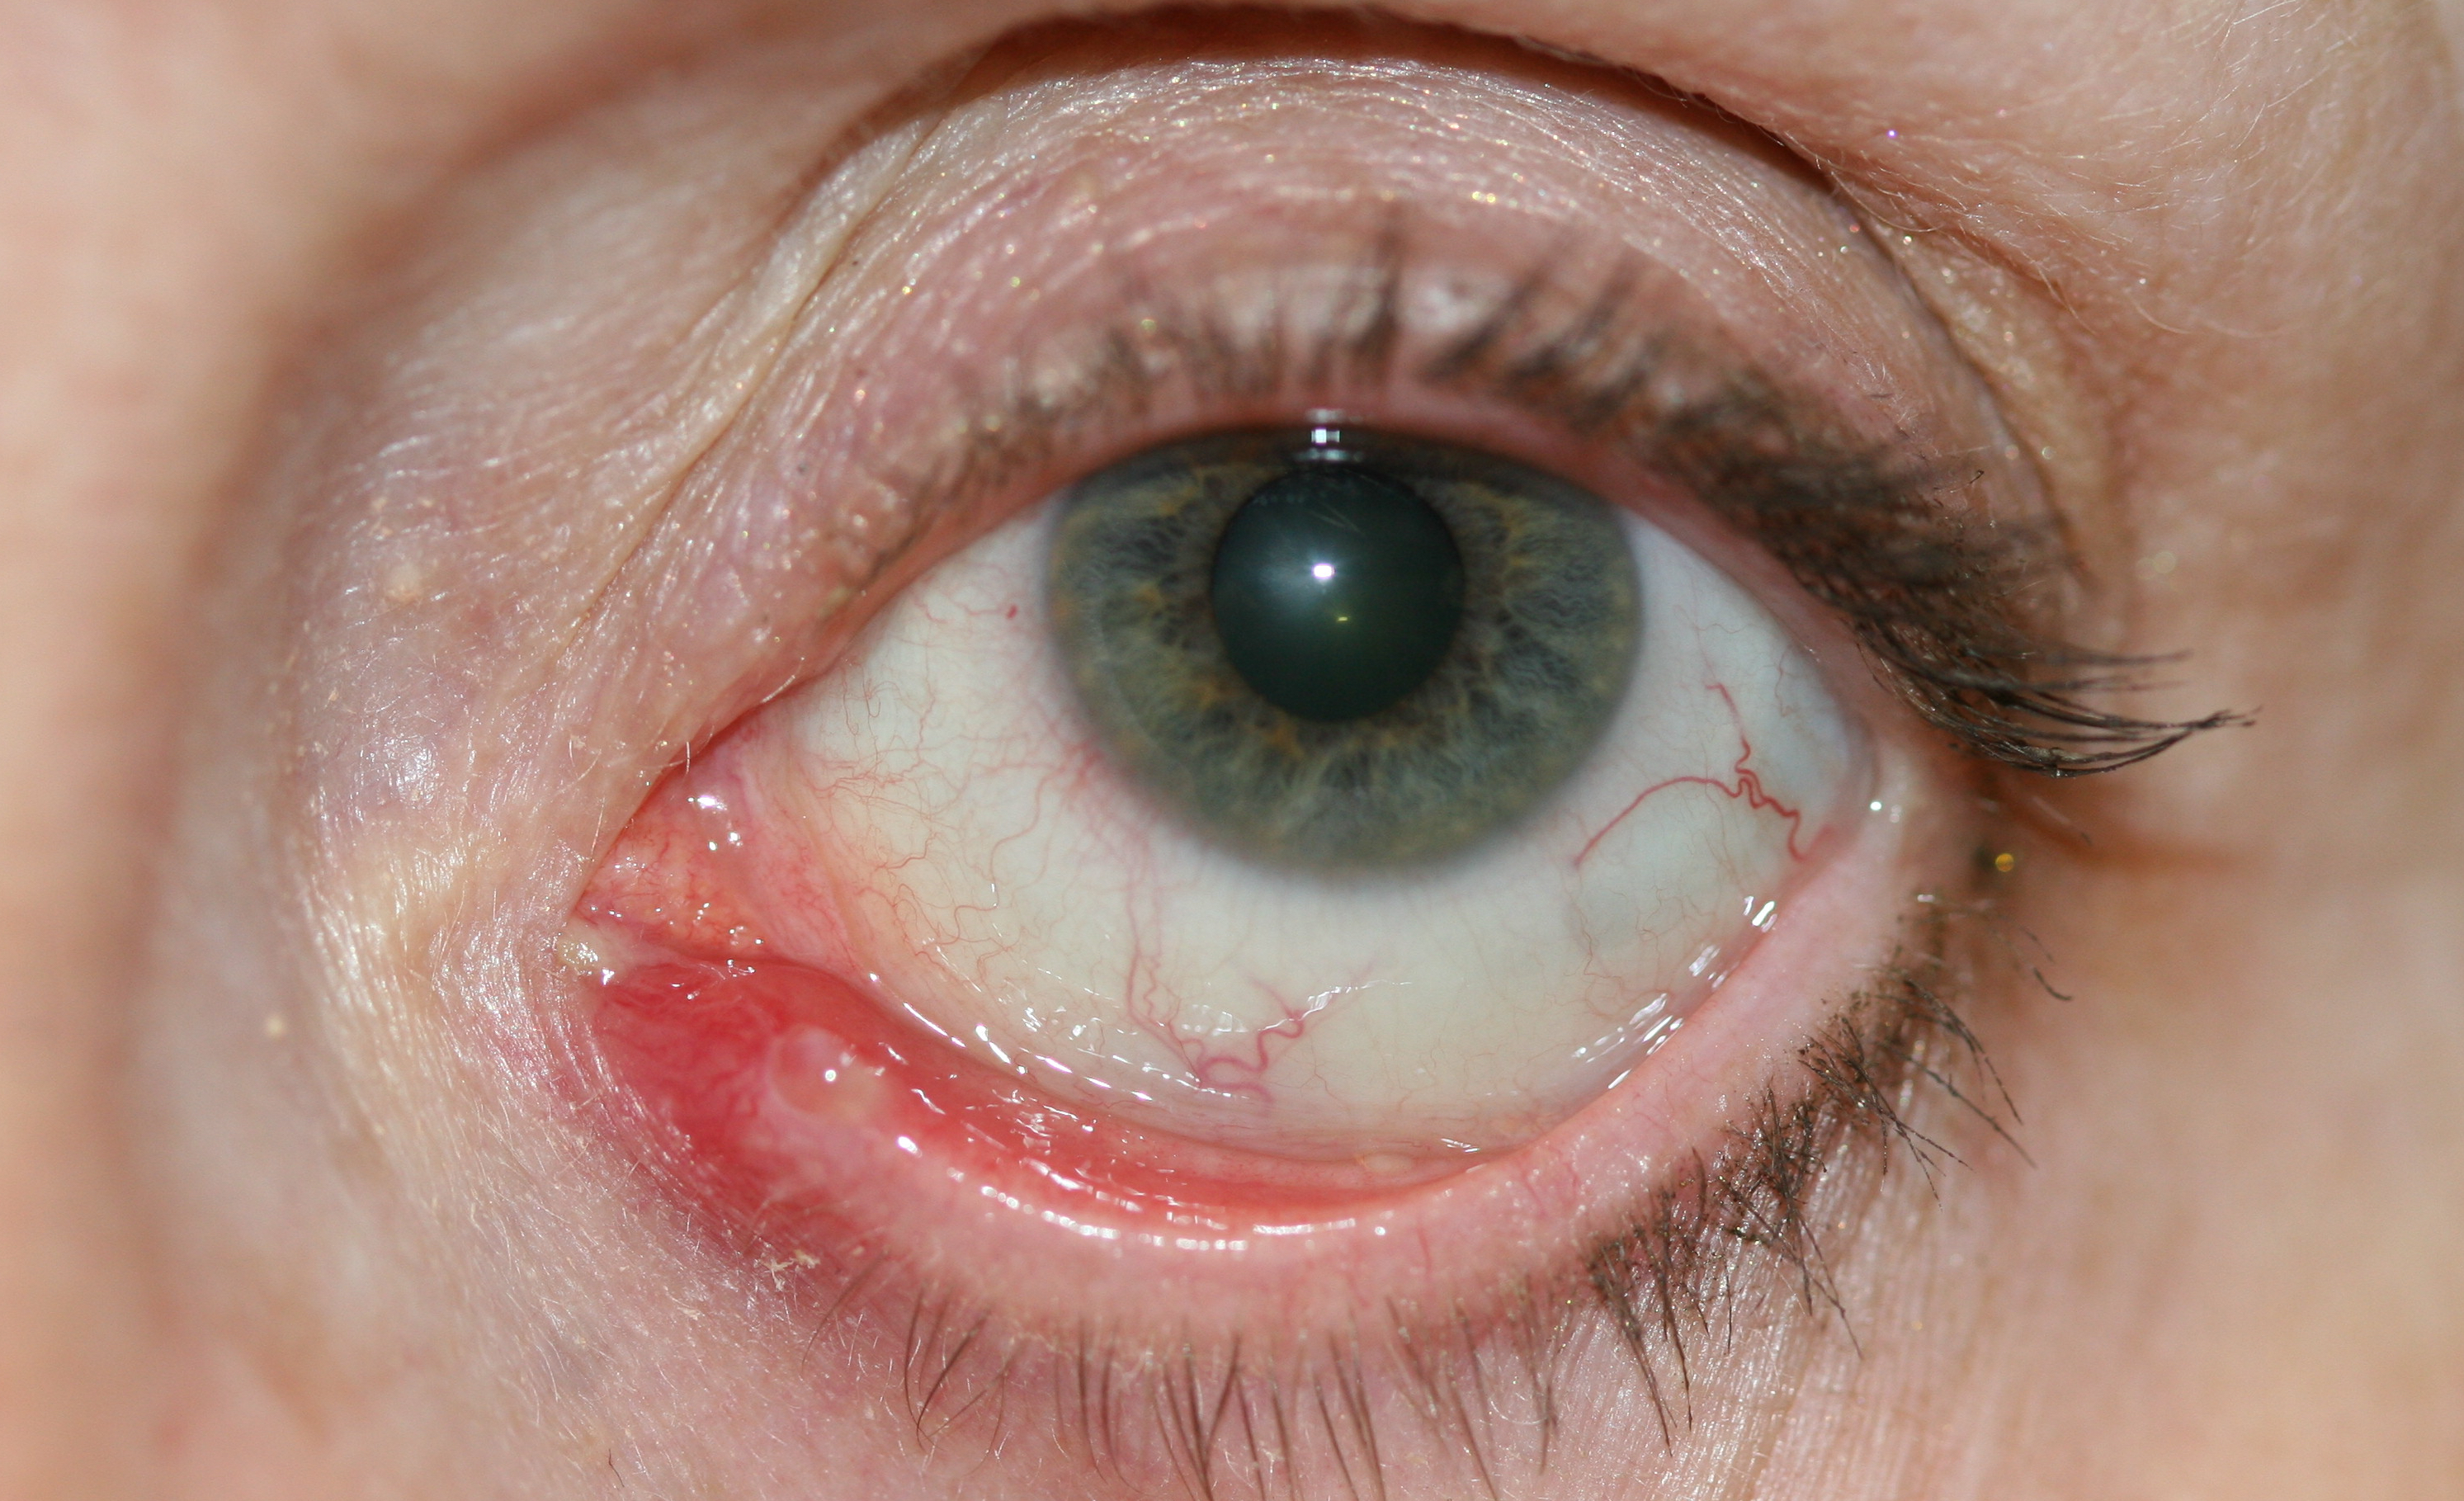 60-year-old female presents with a six-month history of swelling of the medial lower eyelid, discharge and tenderness